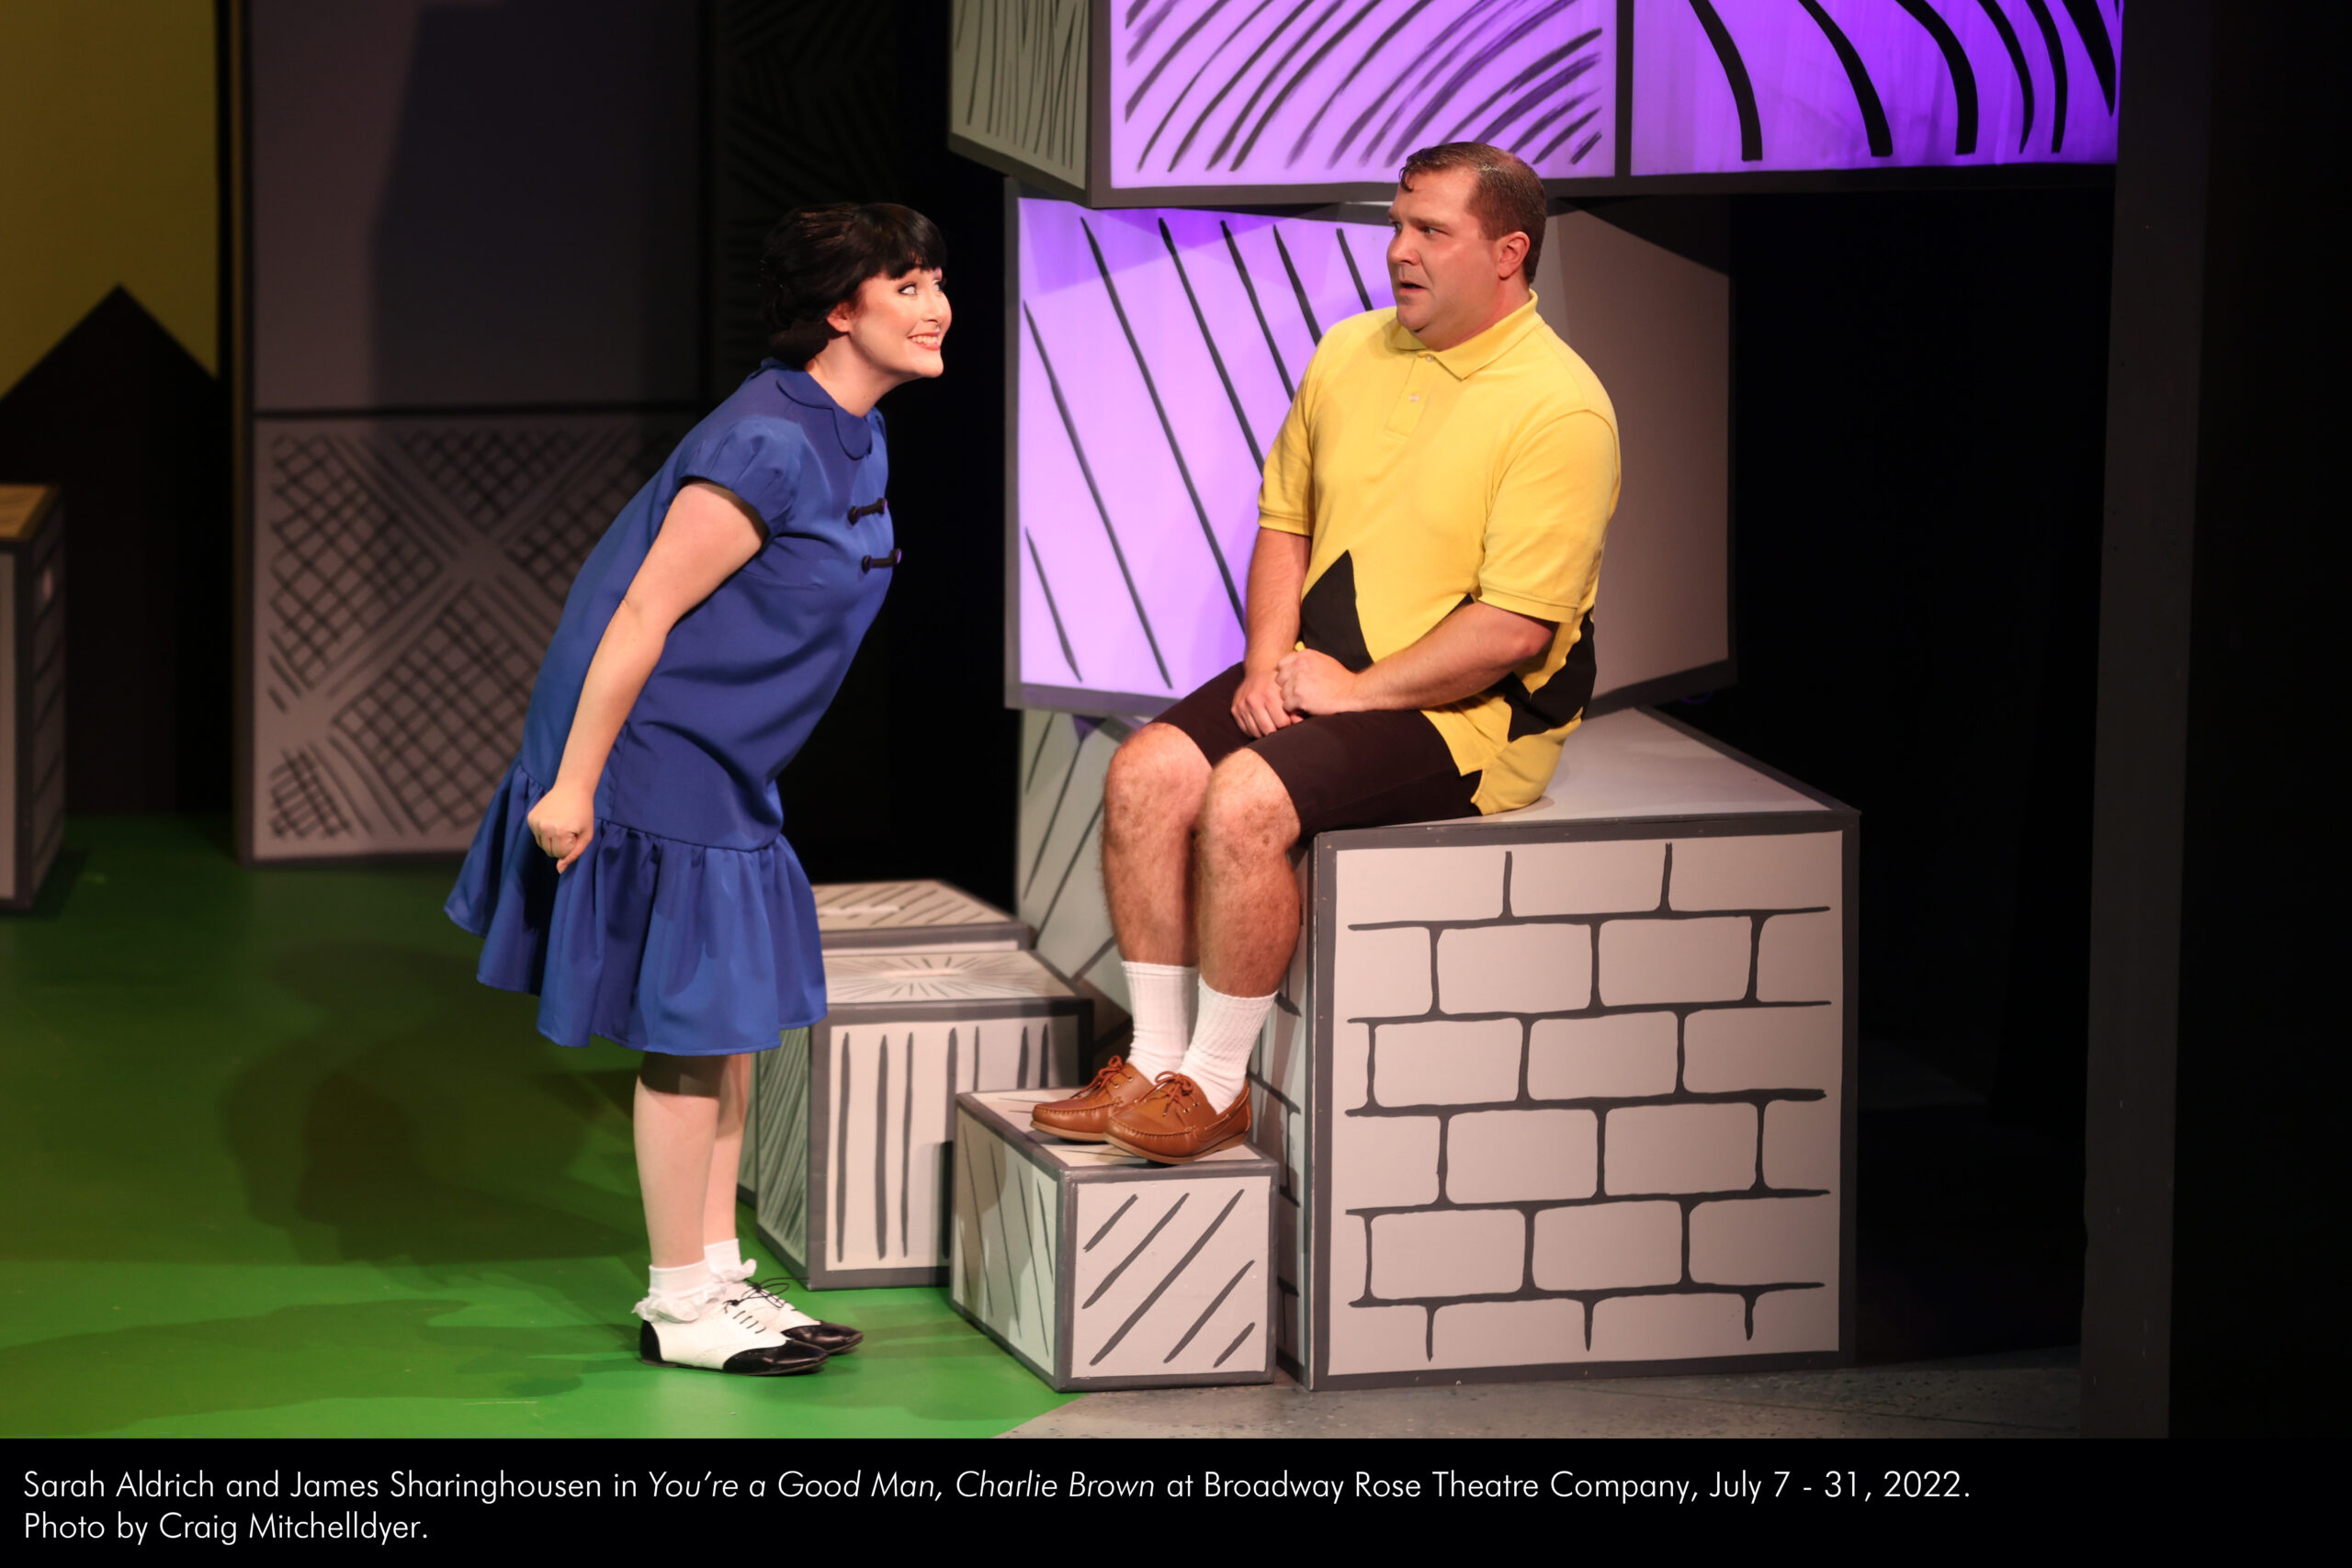 Sarah Aldrich and James Sharinghousen in "You're a Good Man, Charlie Brown" at Broadway Rose Theatre Company, July 7 - 31, 2022. Photo by Craig Mitchelldyer.